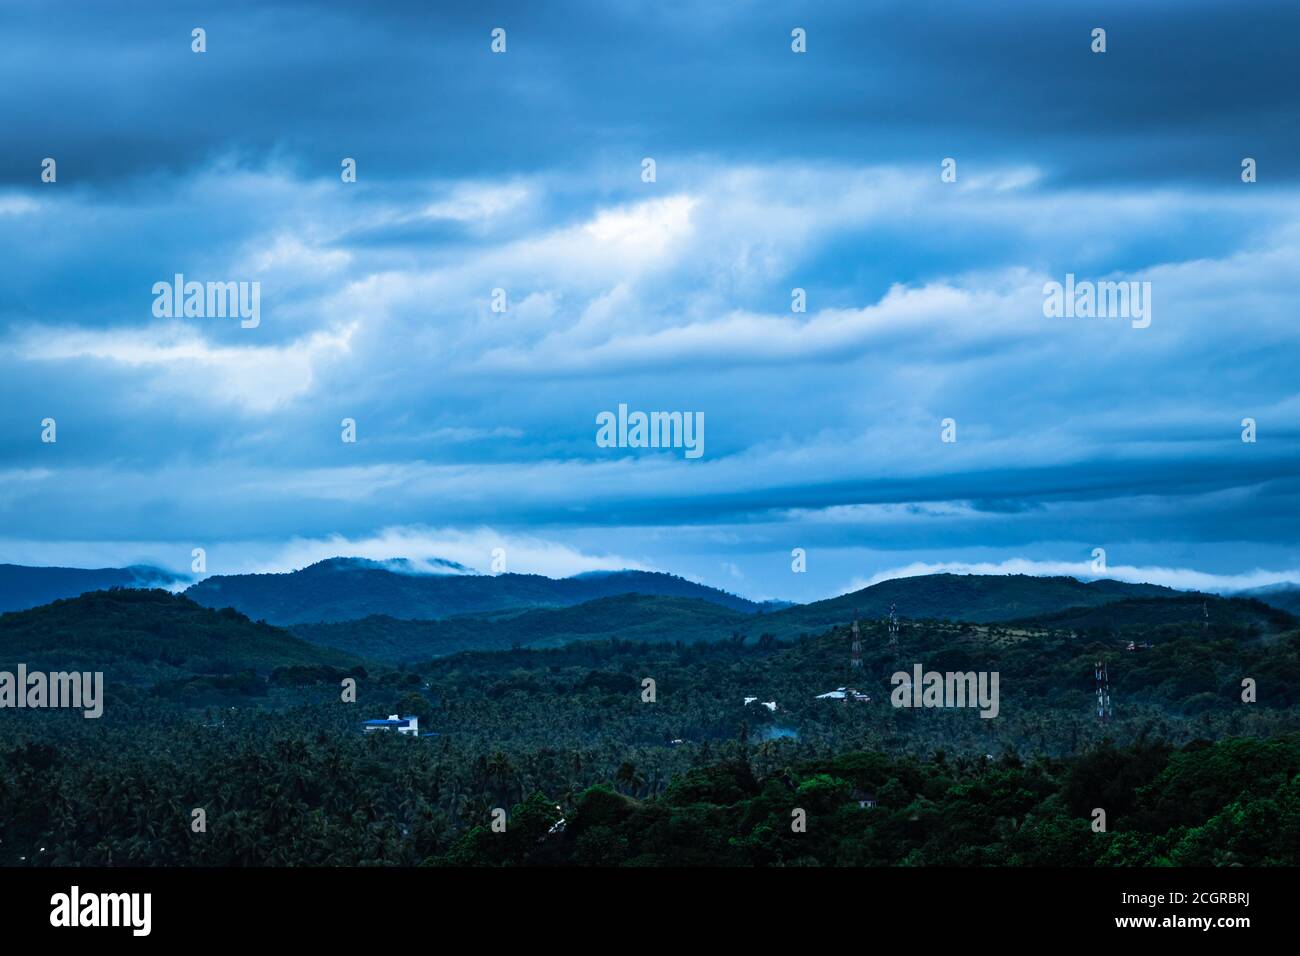 mountain top view of hill range with clouded sky at evening image is taken at gokarna karnataka india. Stock Photo